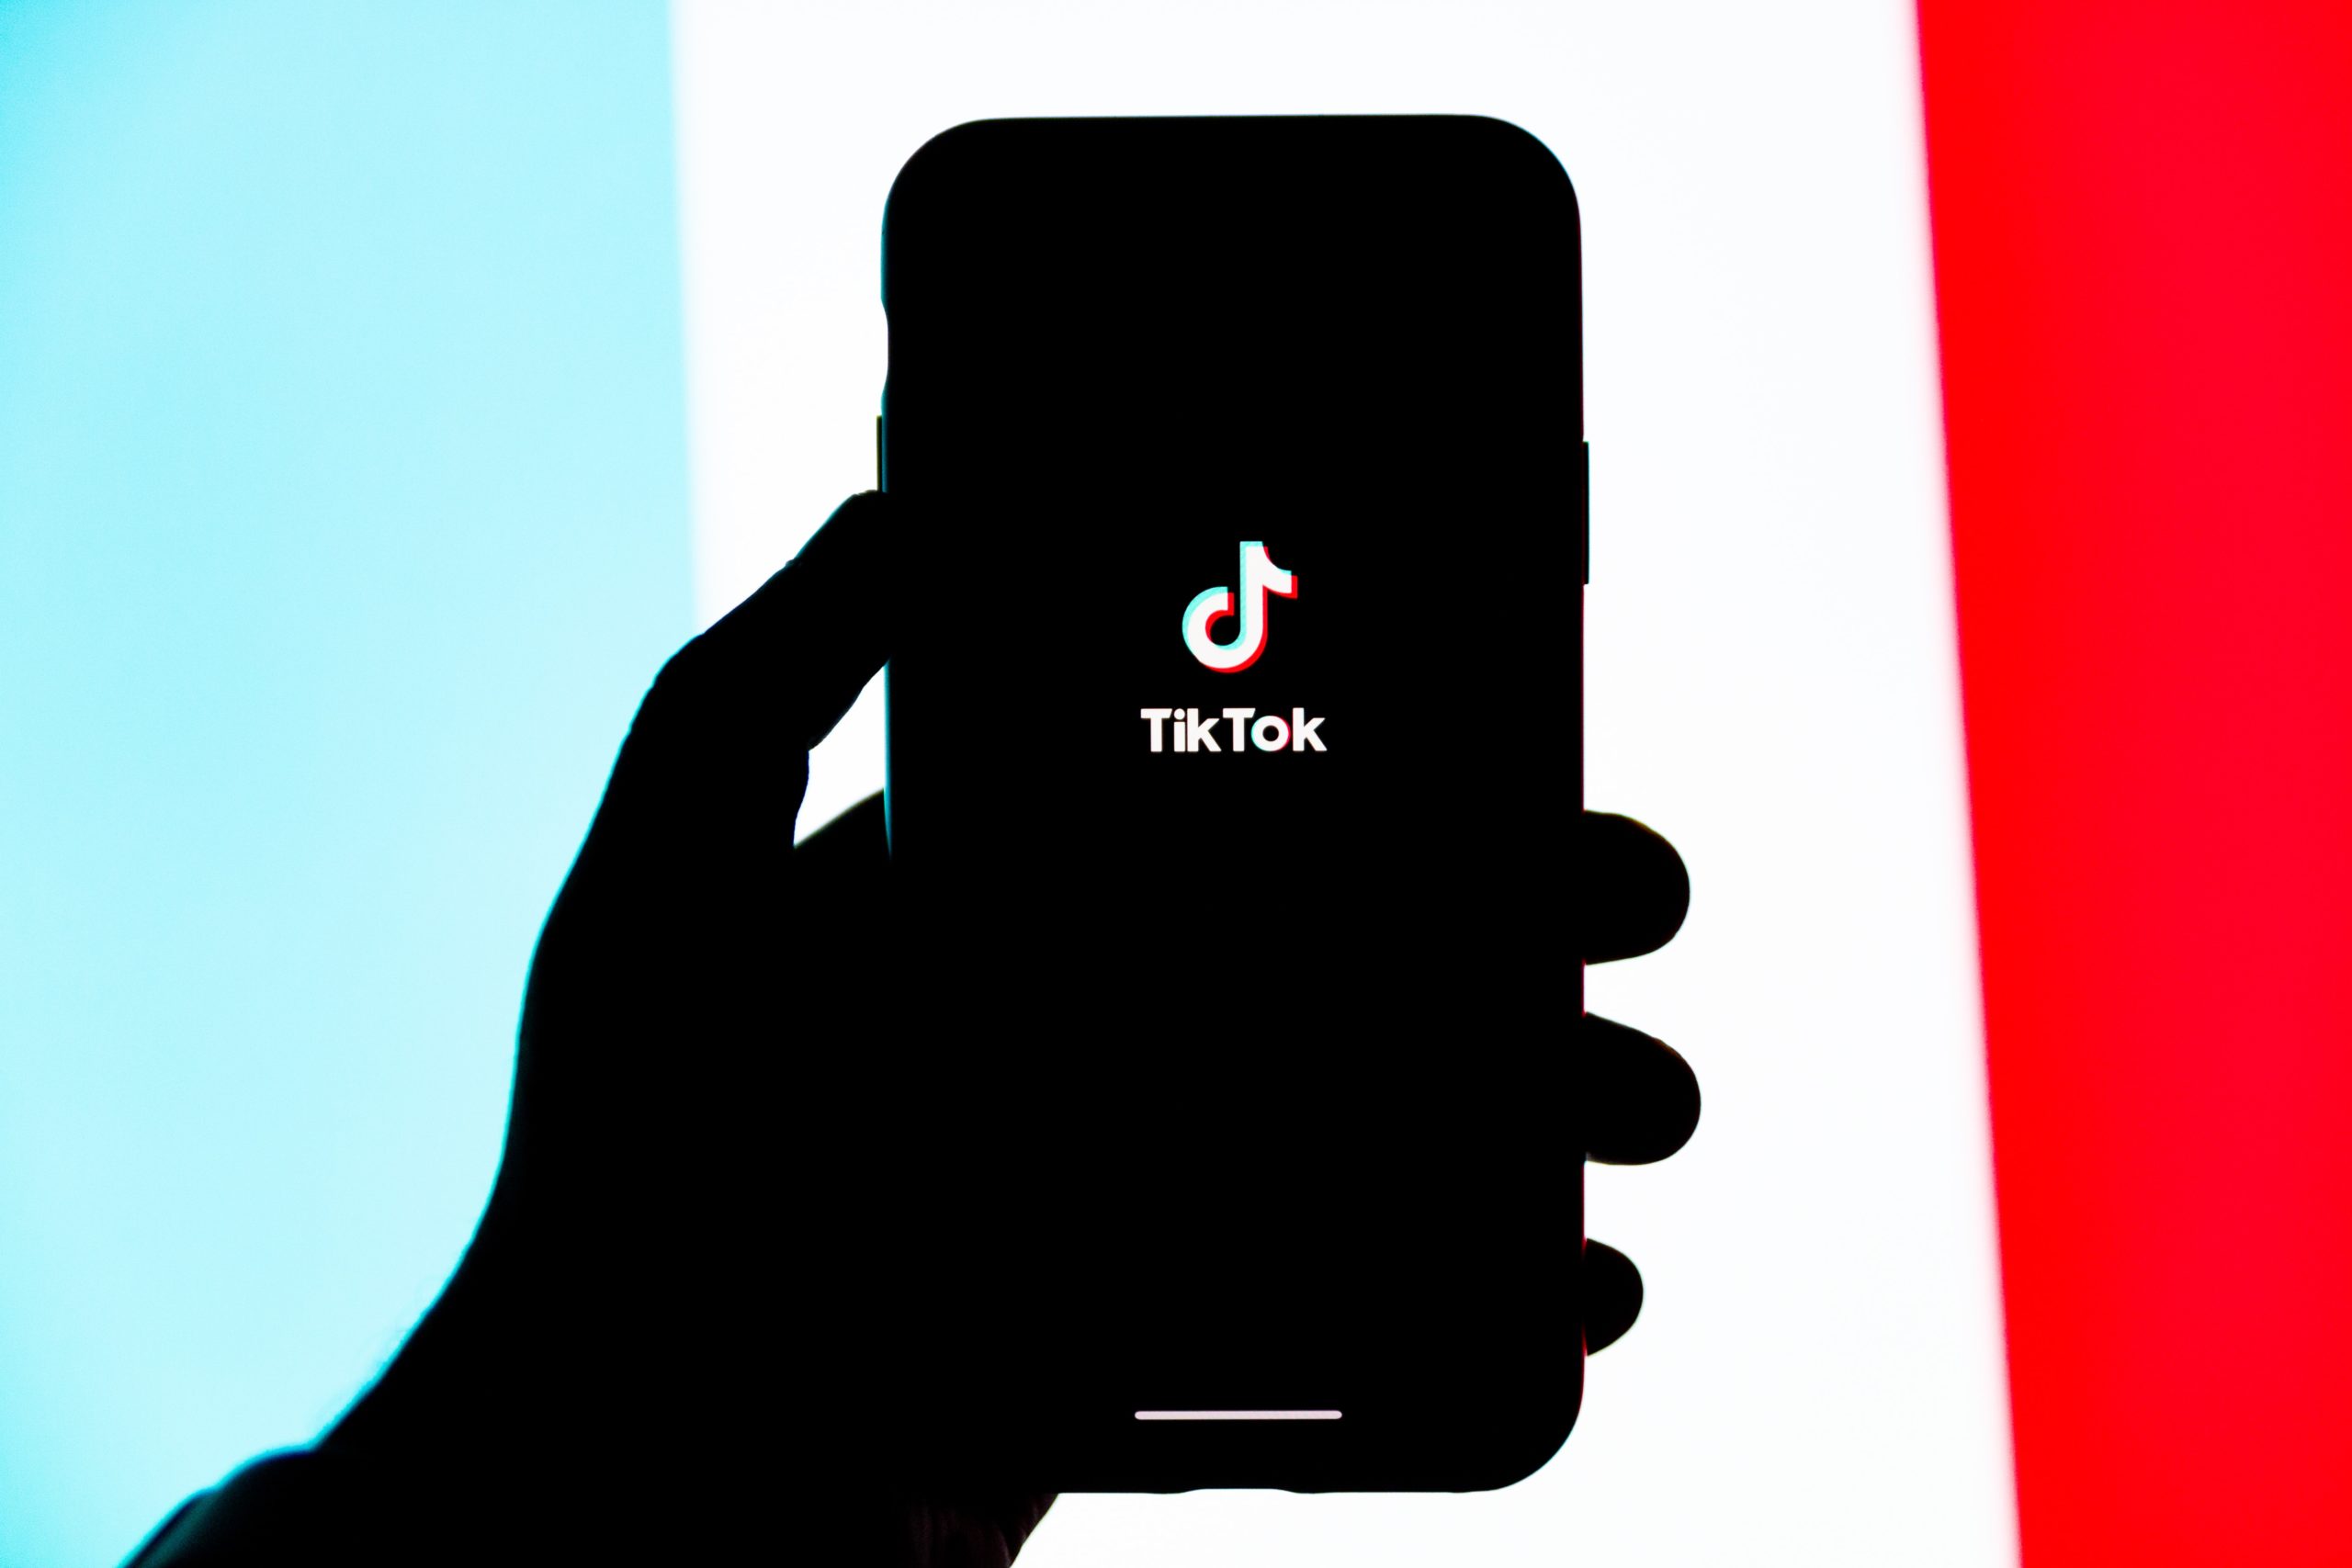 James Seo's TikTok account has proven to be a successful business venture, as it nets him around $20,000 per month.